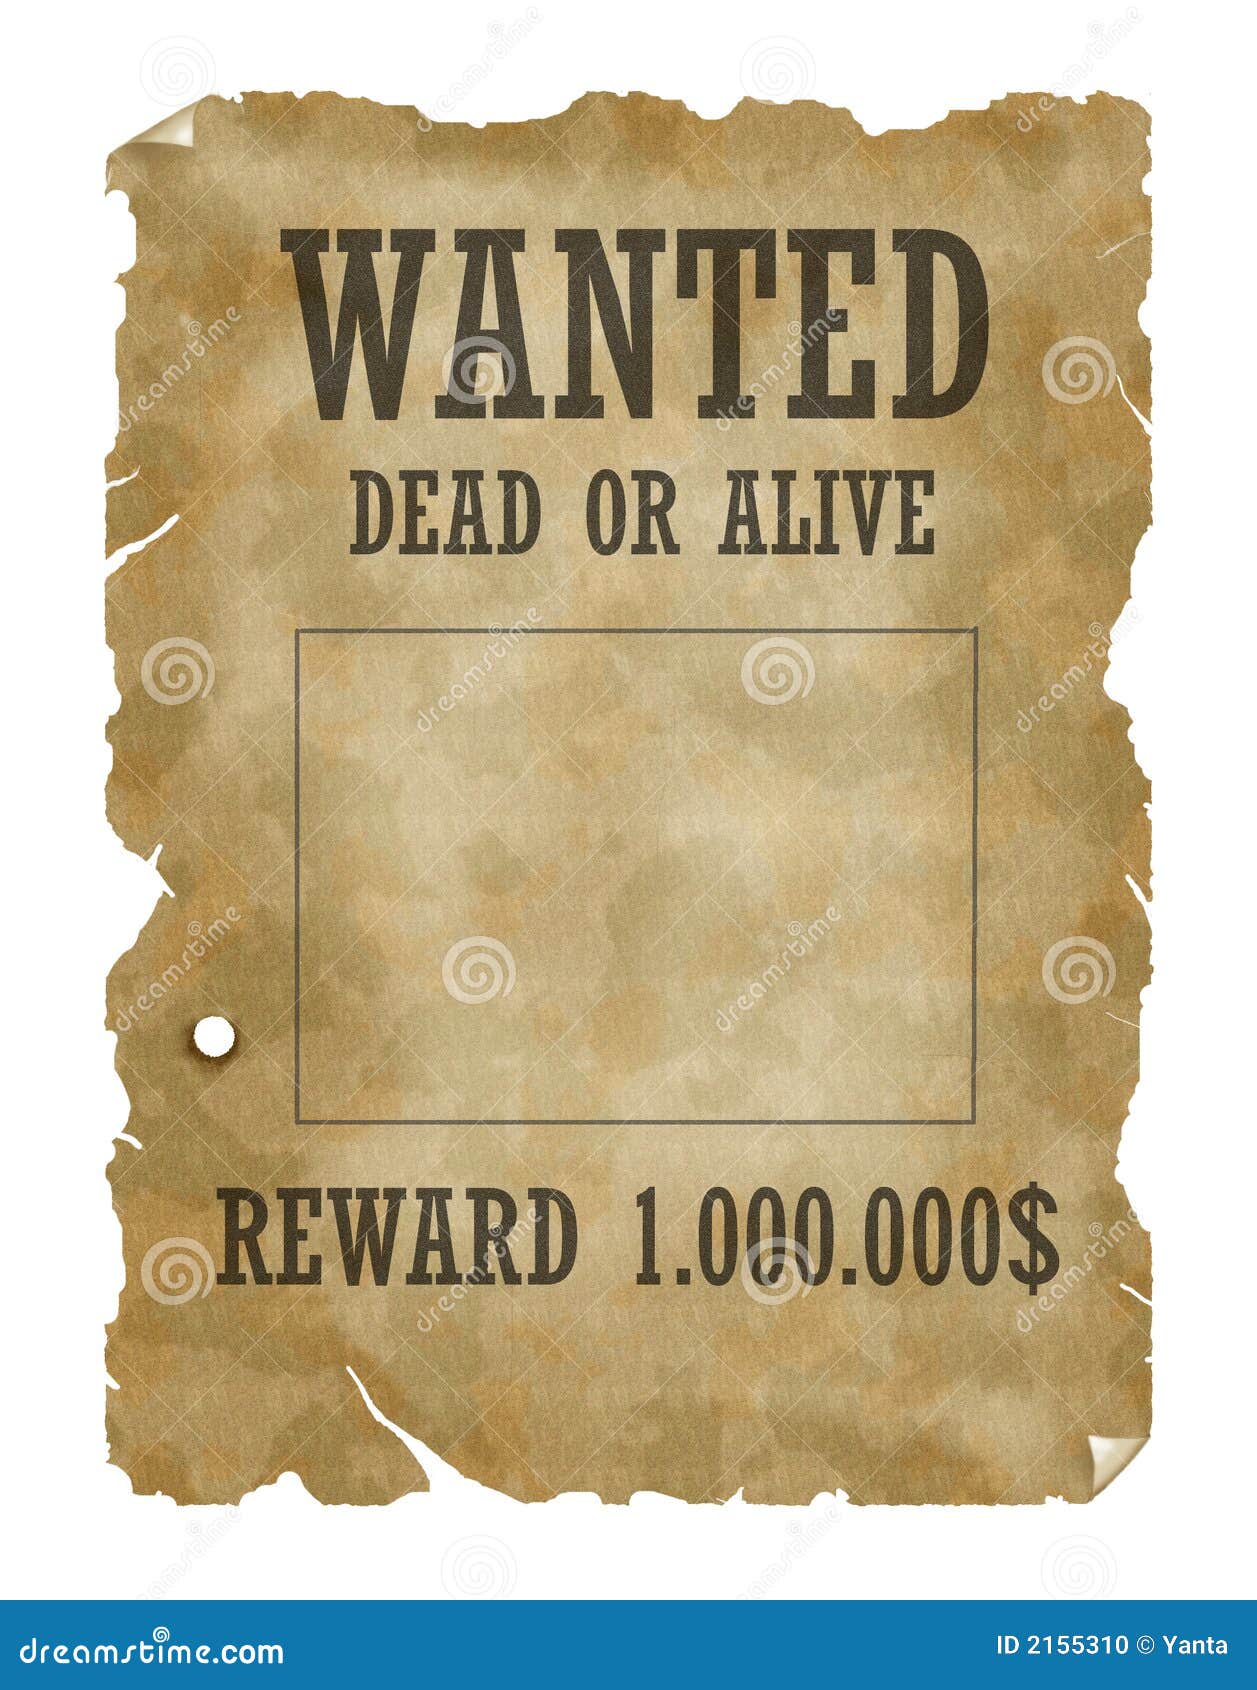 Wanted Dead Or Alive Stock Photo - Image: 2155310